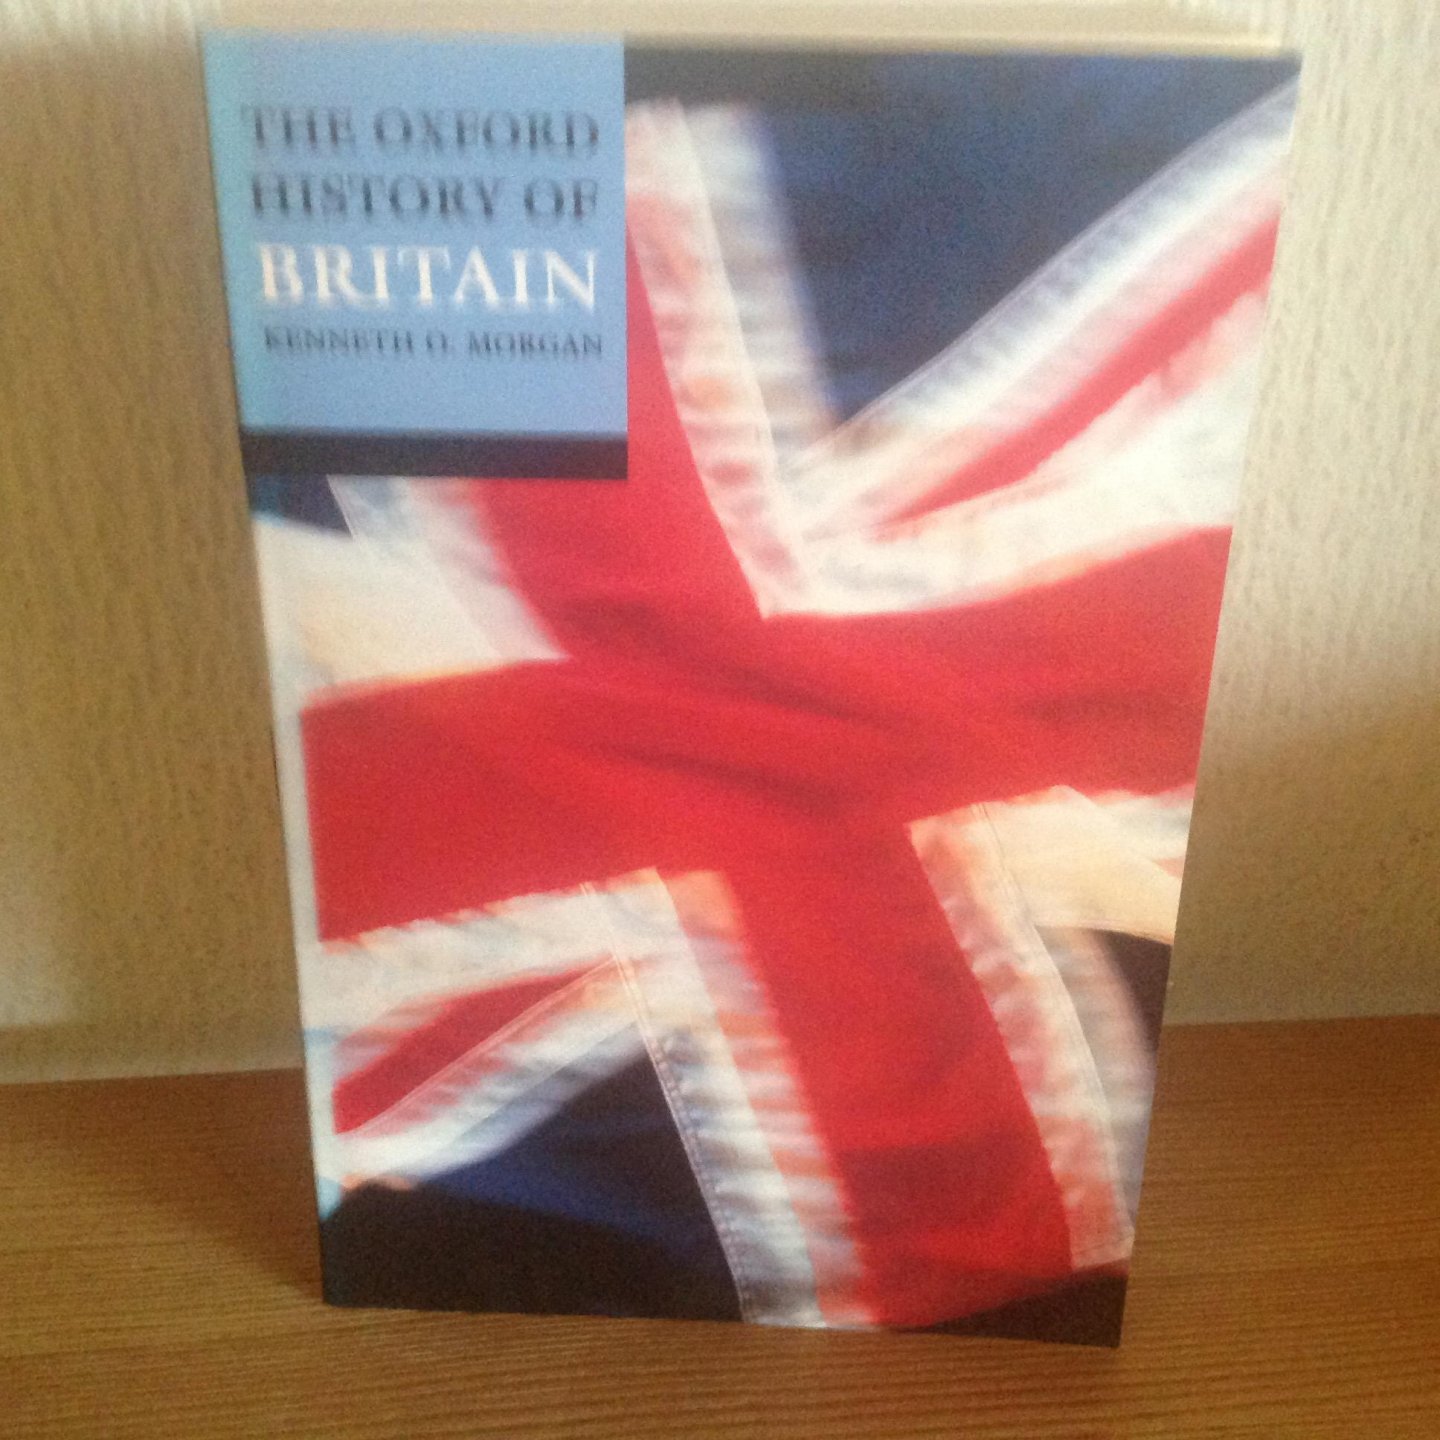 Morgan, Kenneth O. - The Oxford History of Britain